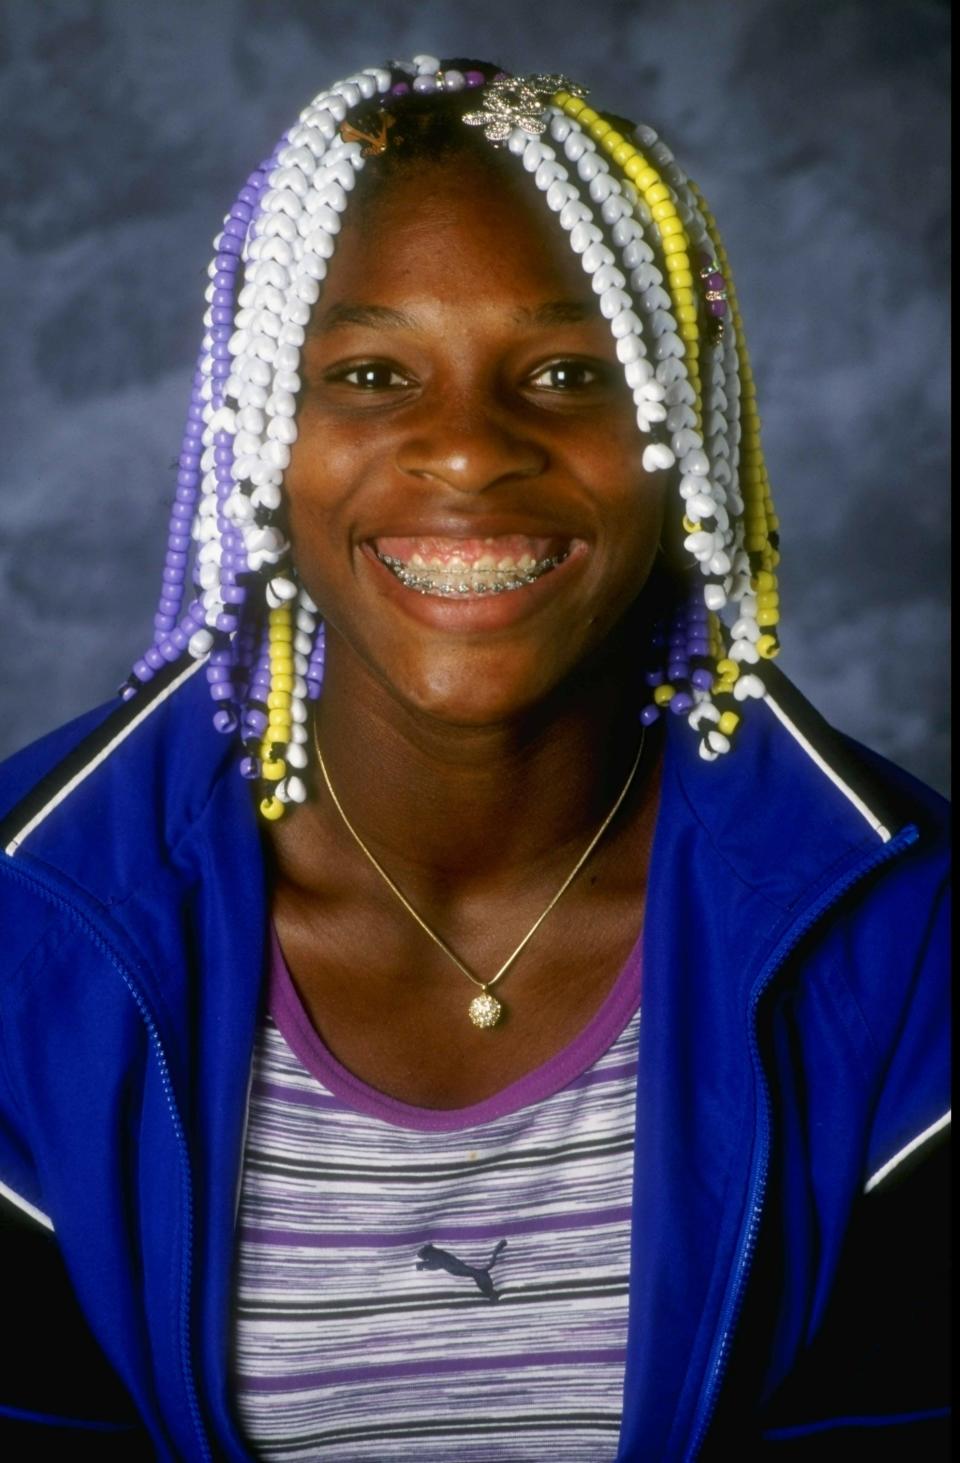 A portrait taken during the 1998 U.S. Open at the USTA National Tennis Center.